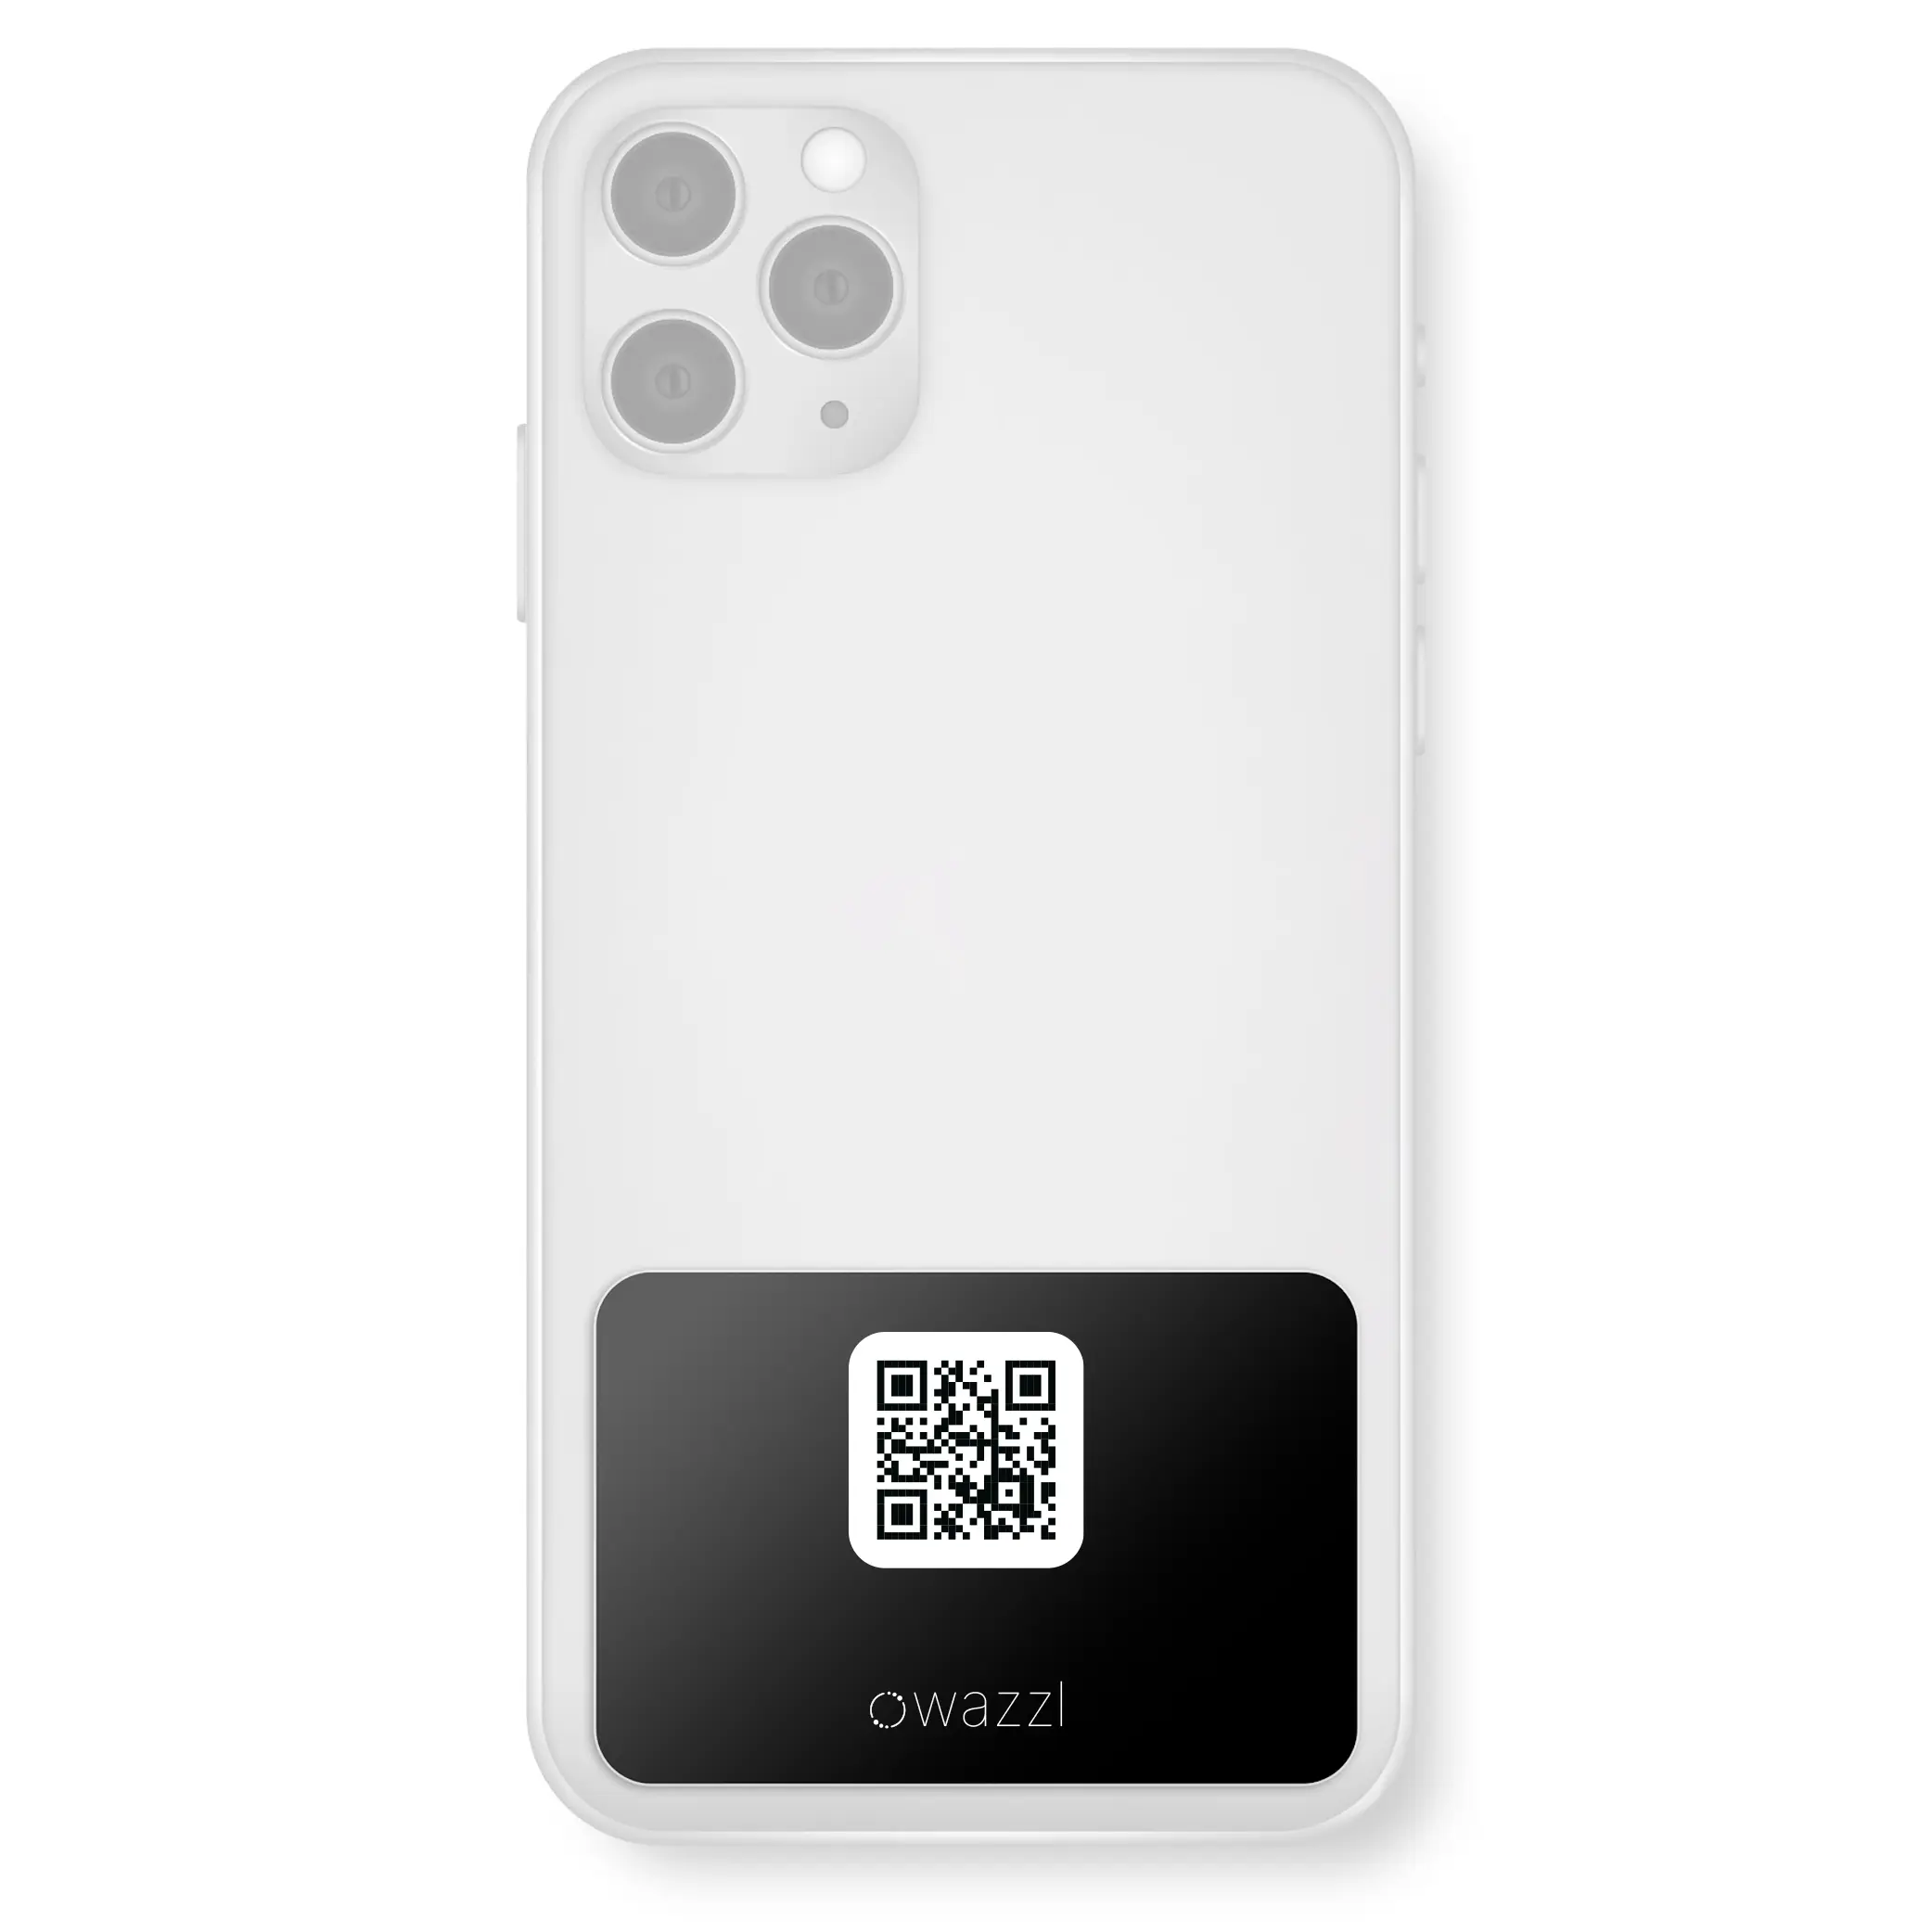 Smartcard with QR-Code - Digital business card